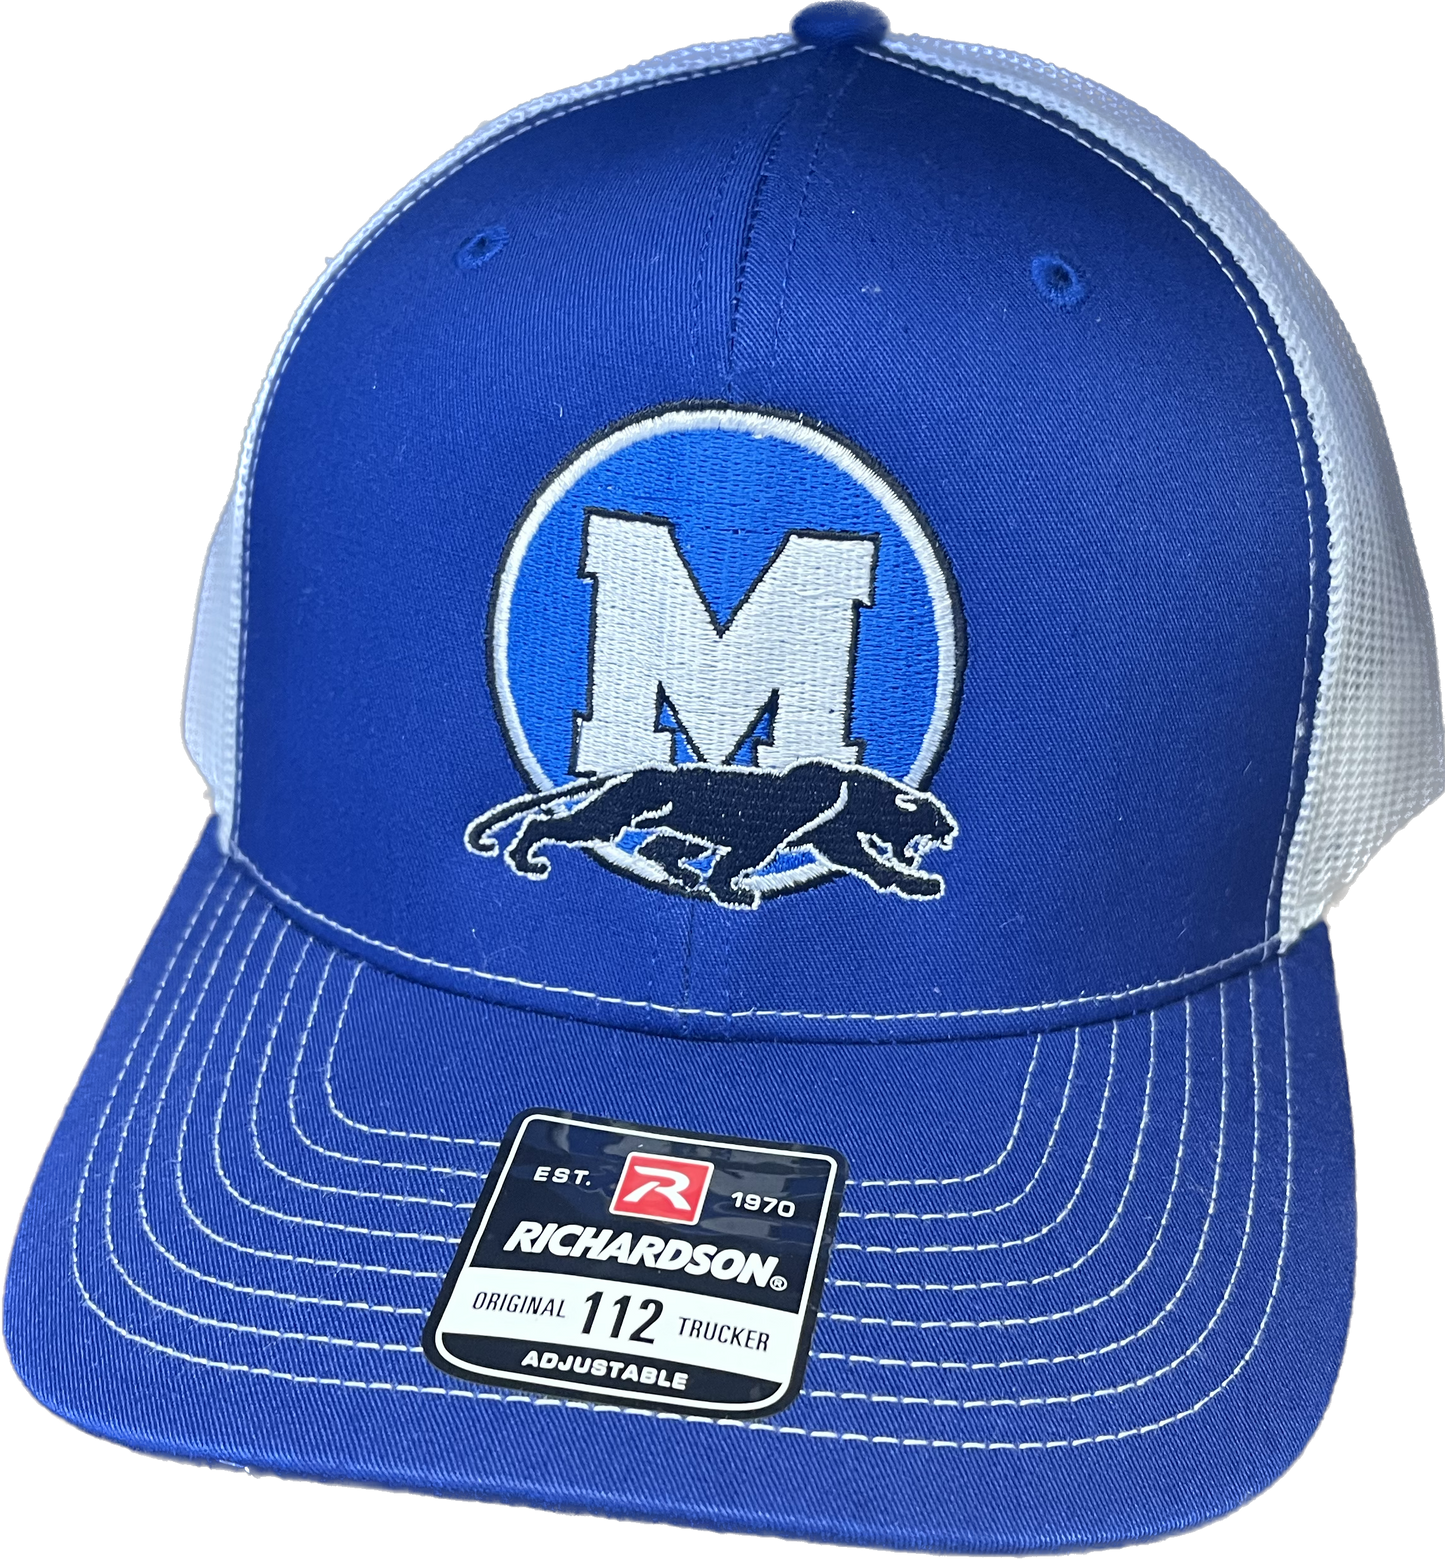 Blue and White Midlothian Hat